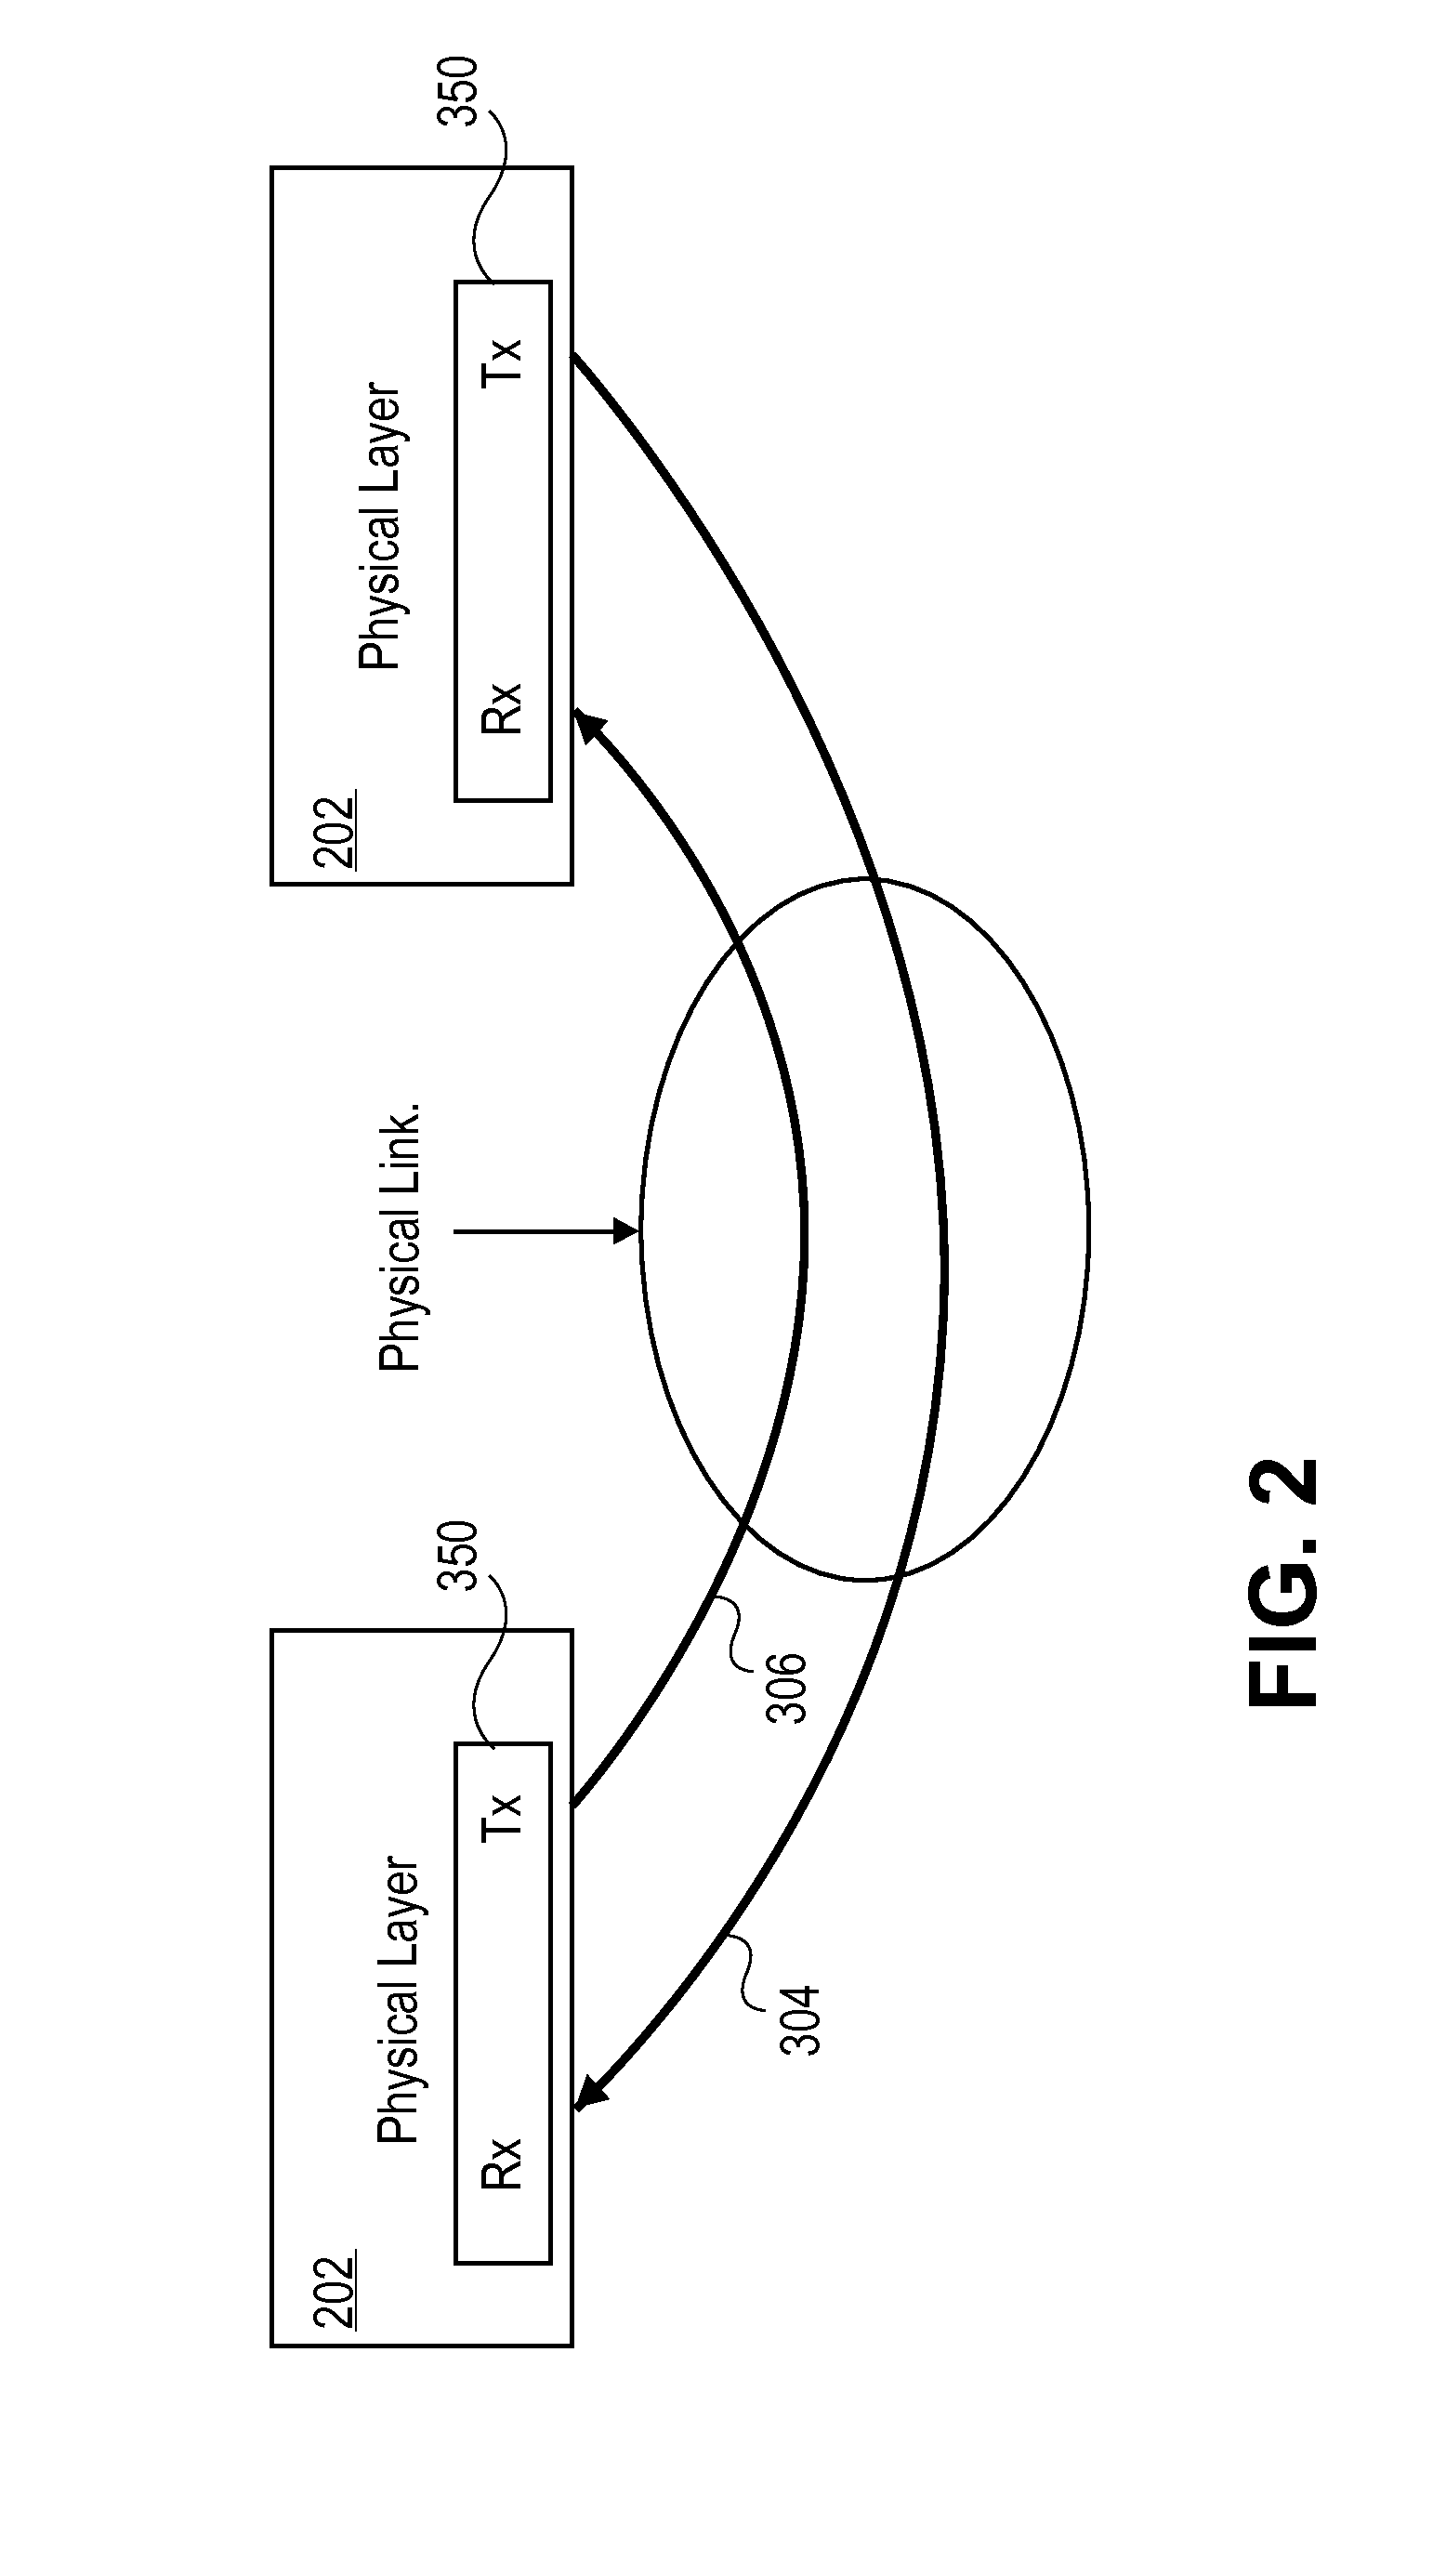 Method, System, and Apparatus for System Level Initialization